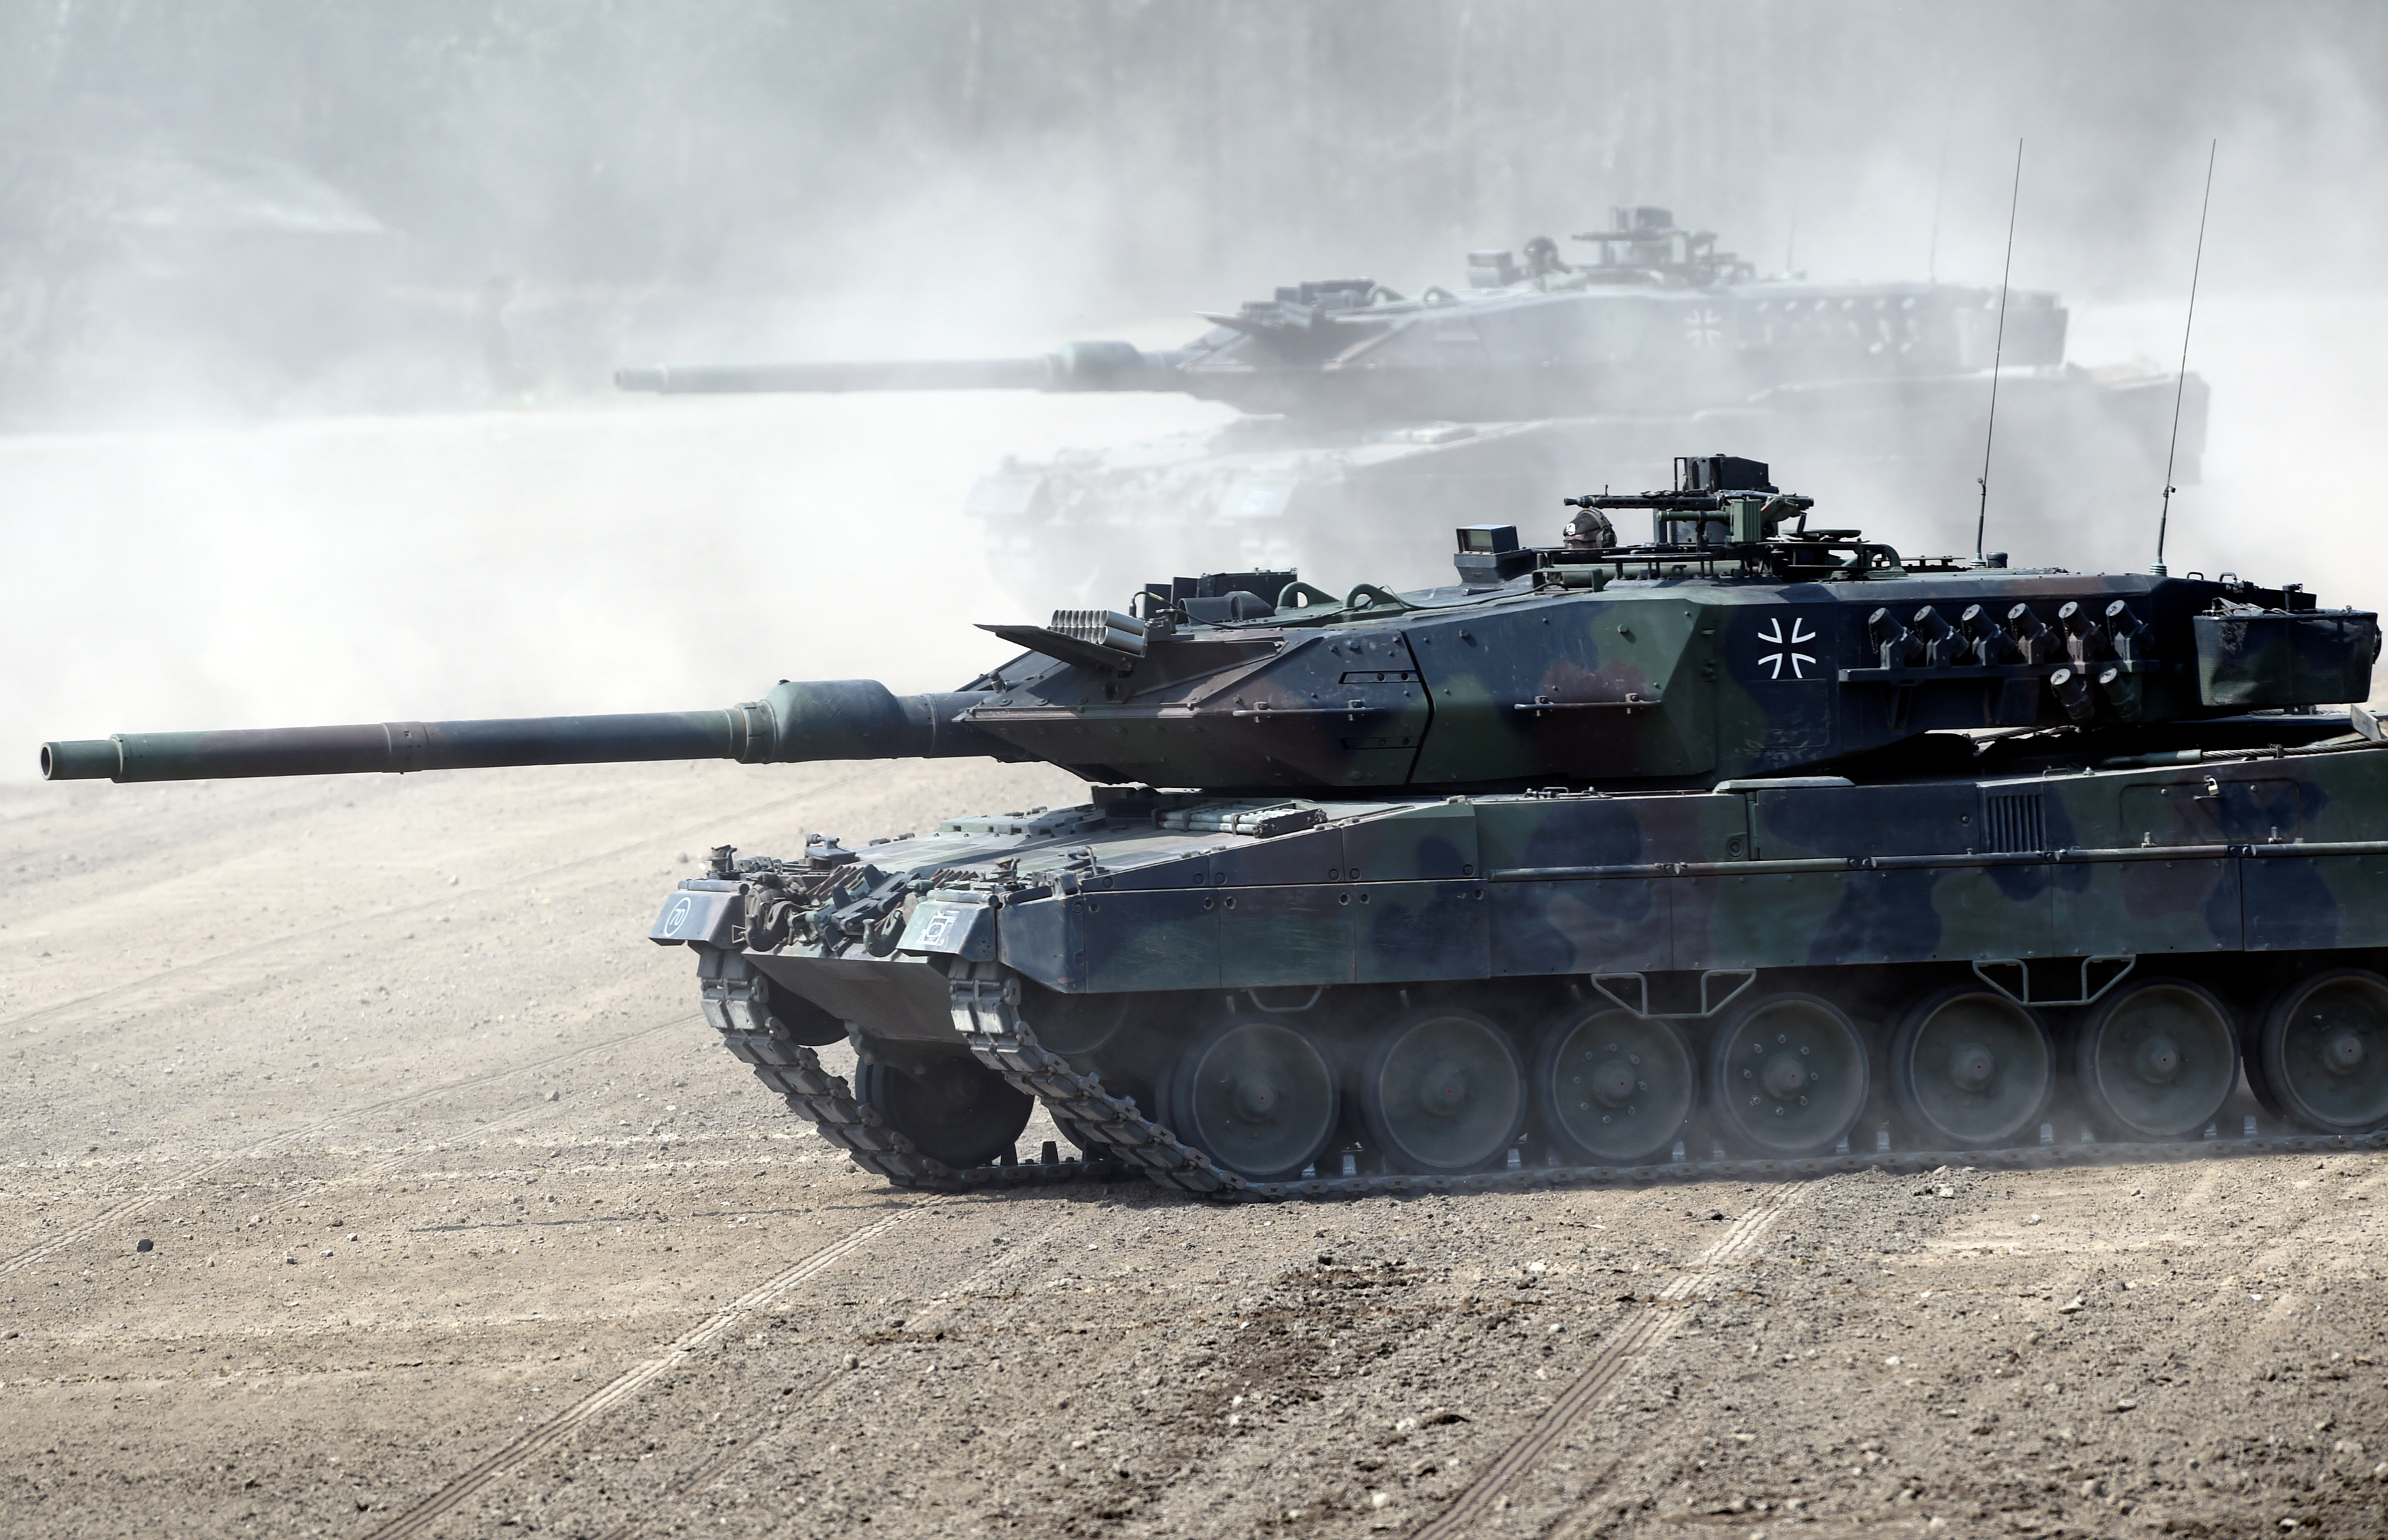 The Czech Republic and Germany want to buy Leopard 2 tanks from Switzerland